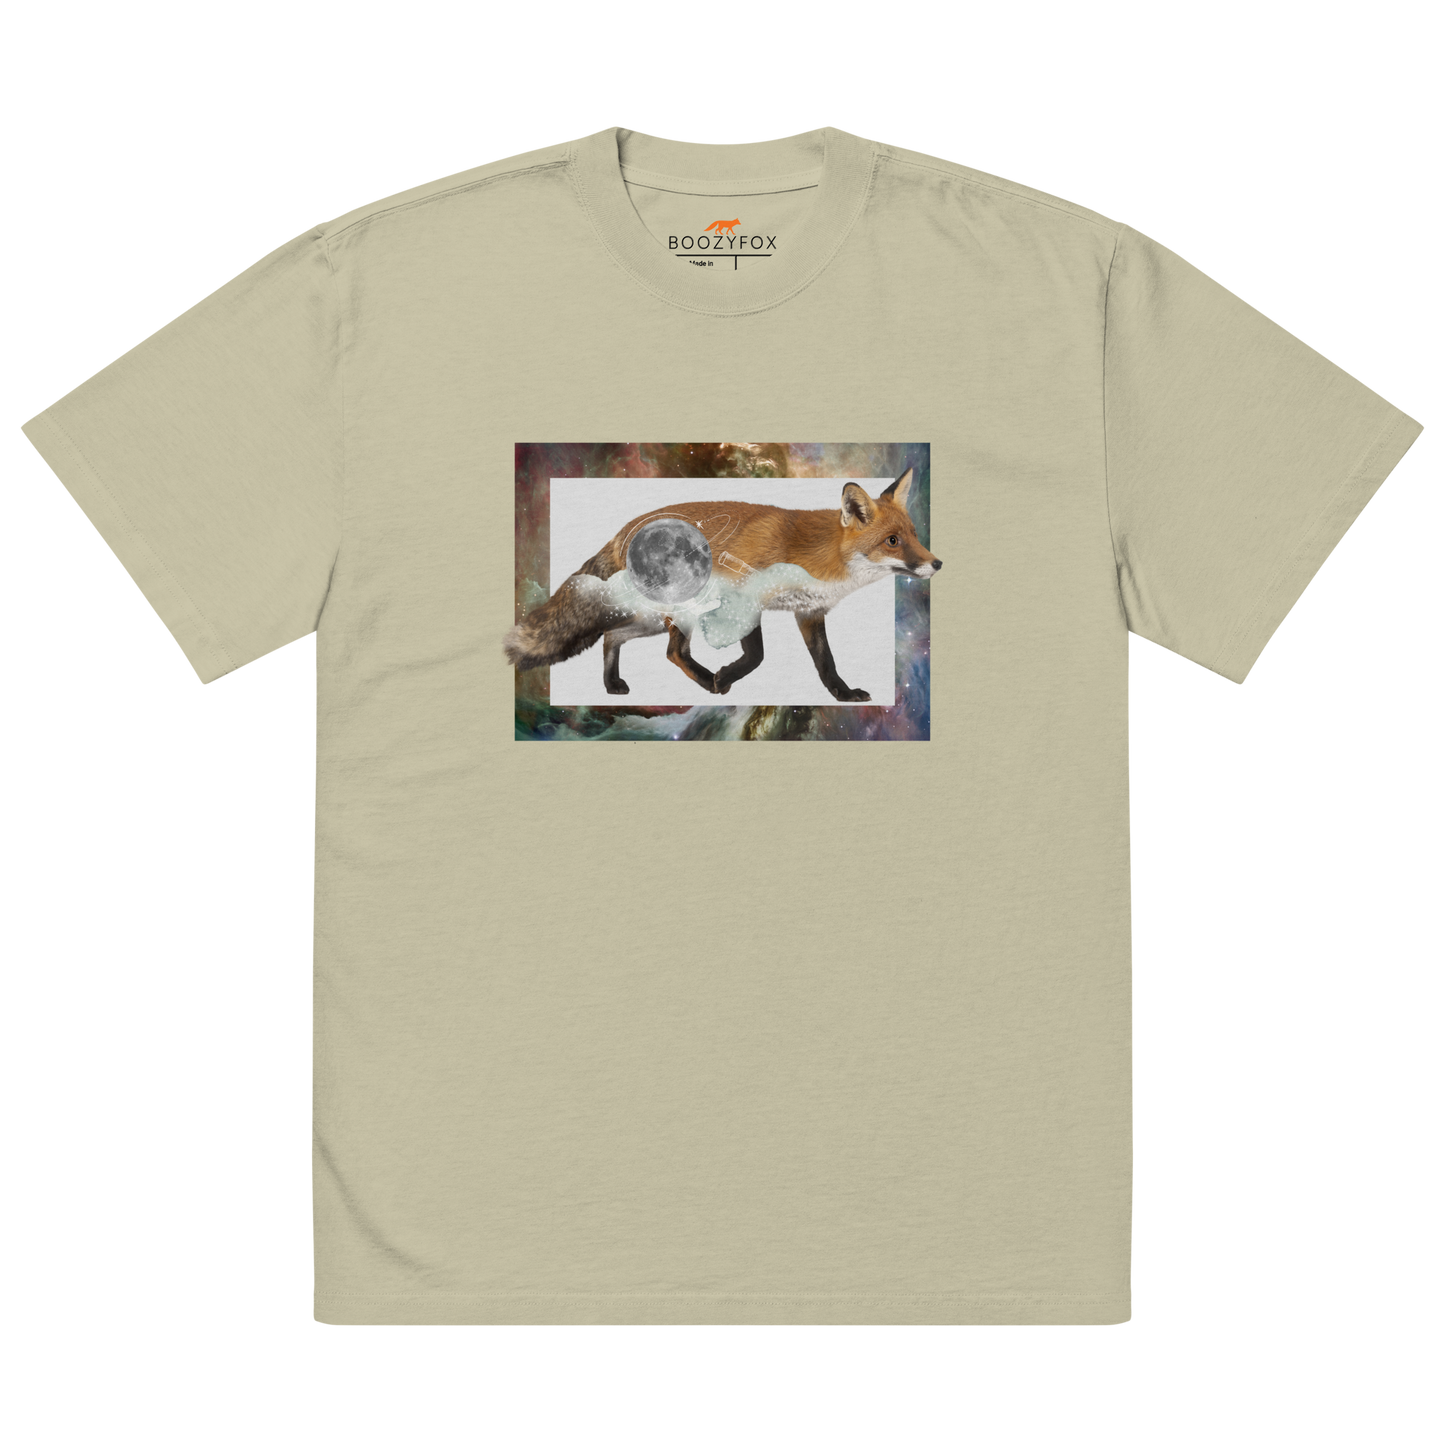 Faded Eucalyptus Fox Oversized T-Shirt featuring a stellar Space Fox graphic on the chest - Cool Graphic Fox Oversized Tees - Boozy Fox